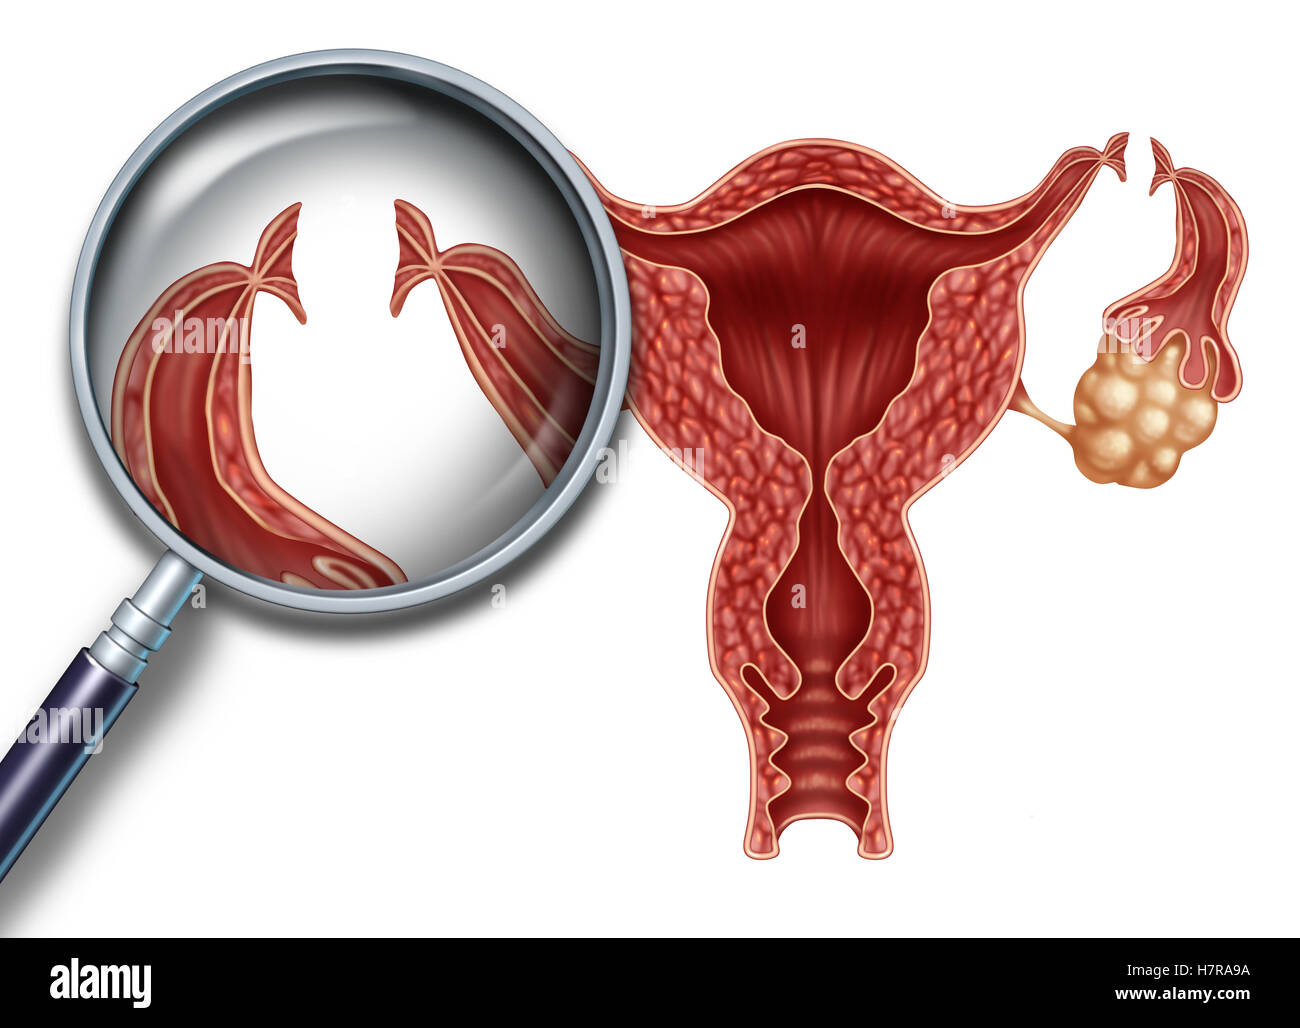 Tubal ligation reproduction medical procedure for female sterilization as a uterus with incisions on the fallopian tubes to block the egg from being fertilized as a fertility and gynecology medicine concept with 3D illustration elements. Stock Photo